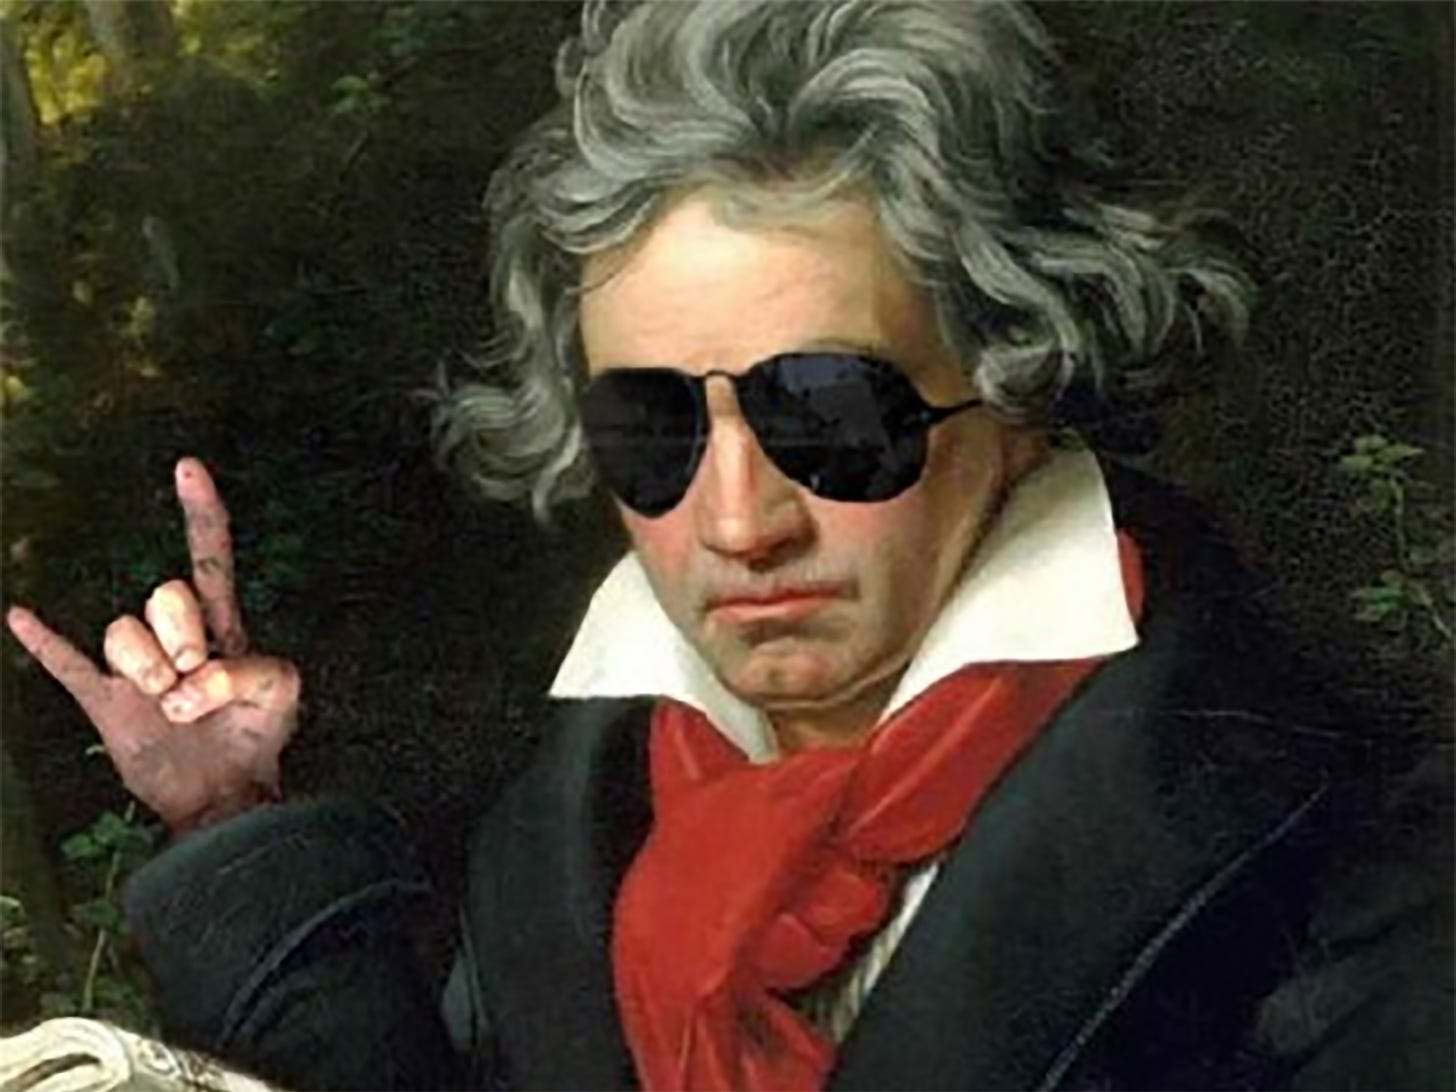 Beethoven - Orchestra of the Age of Enlightenment